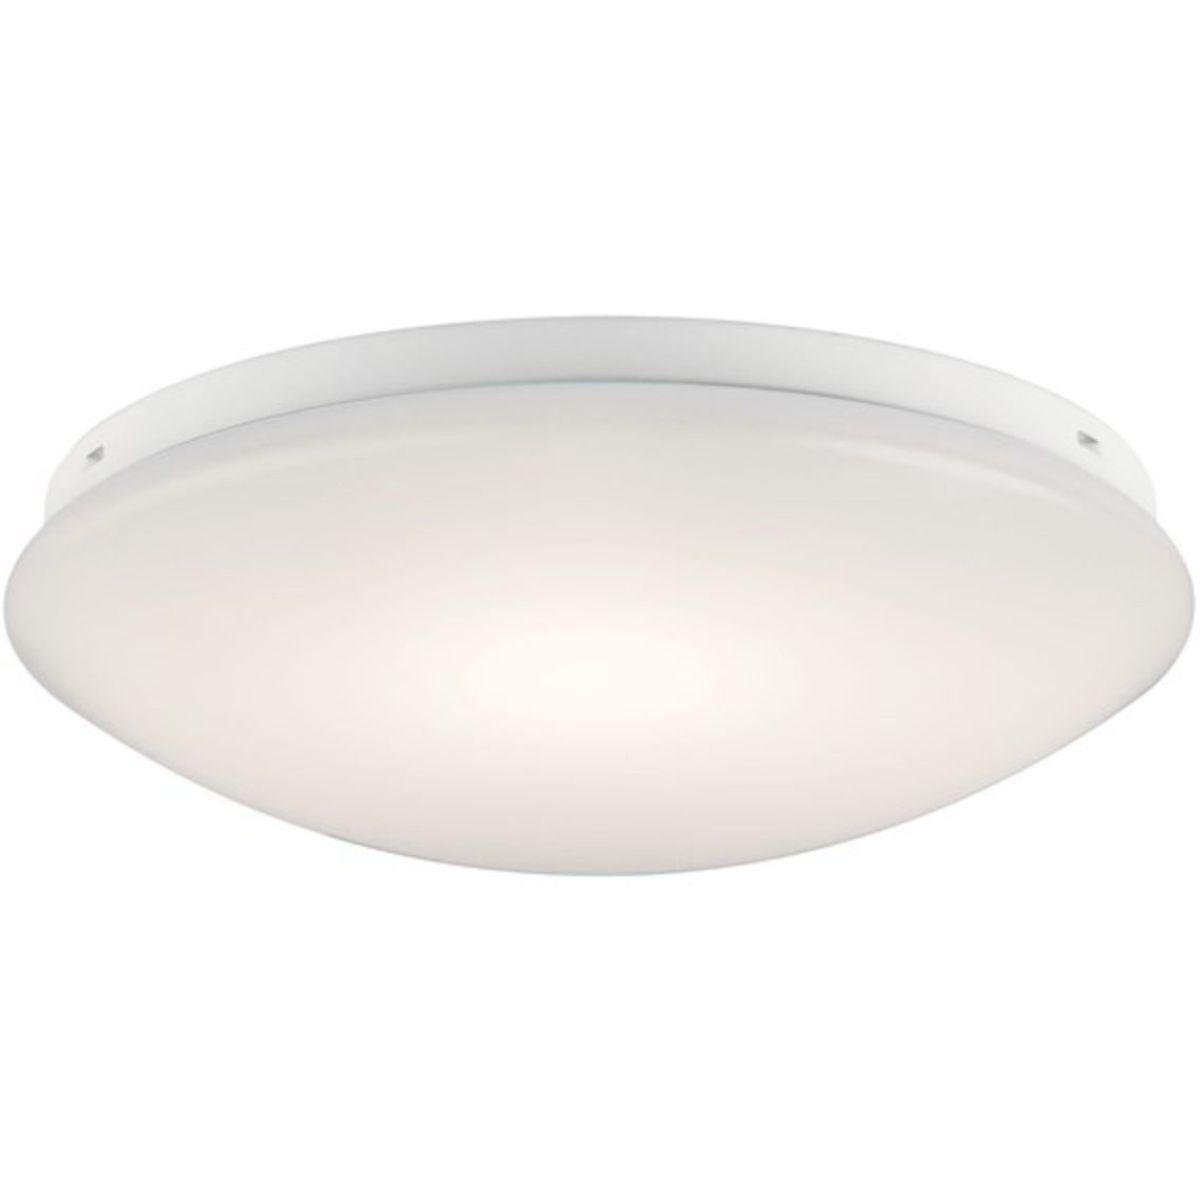 Ceiling Space 14 in. LED Puff Light 1470 Lumens 3000K White finish